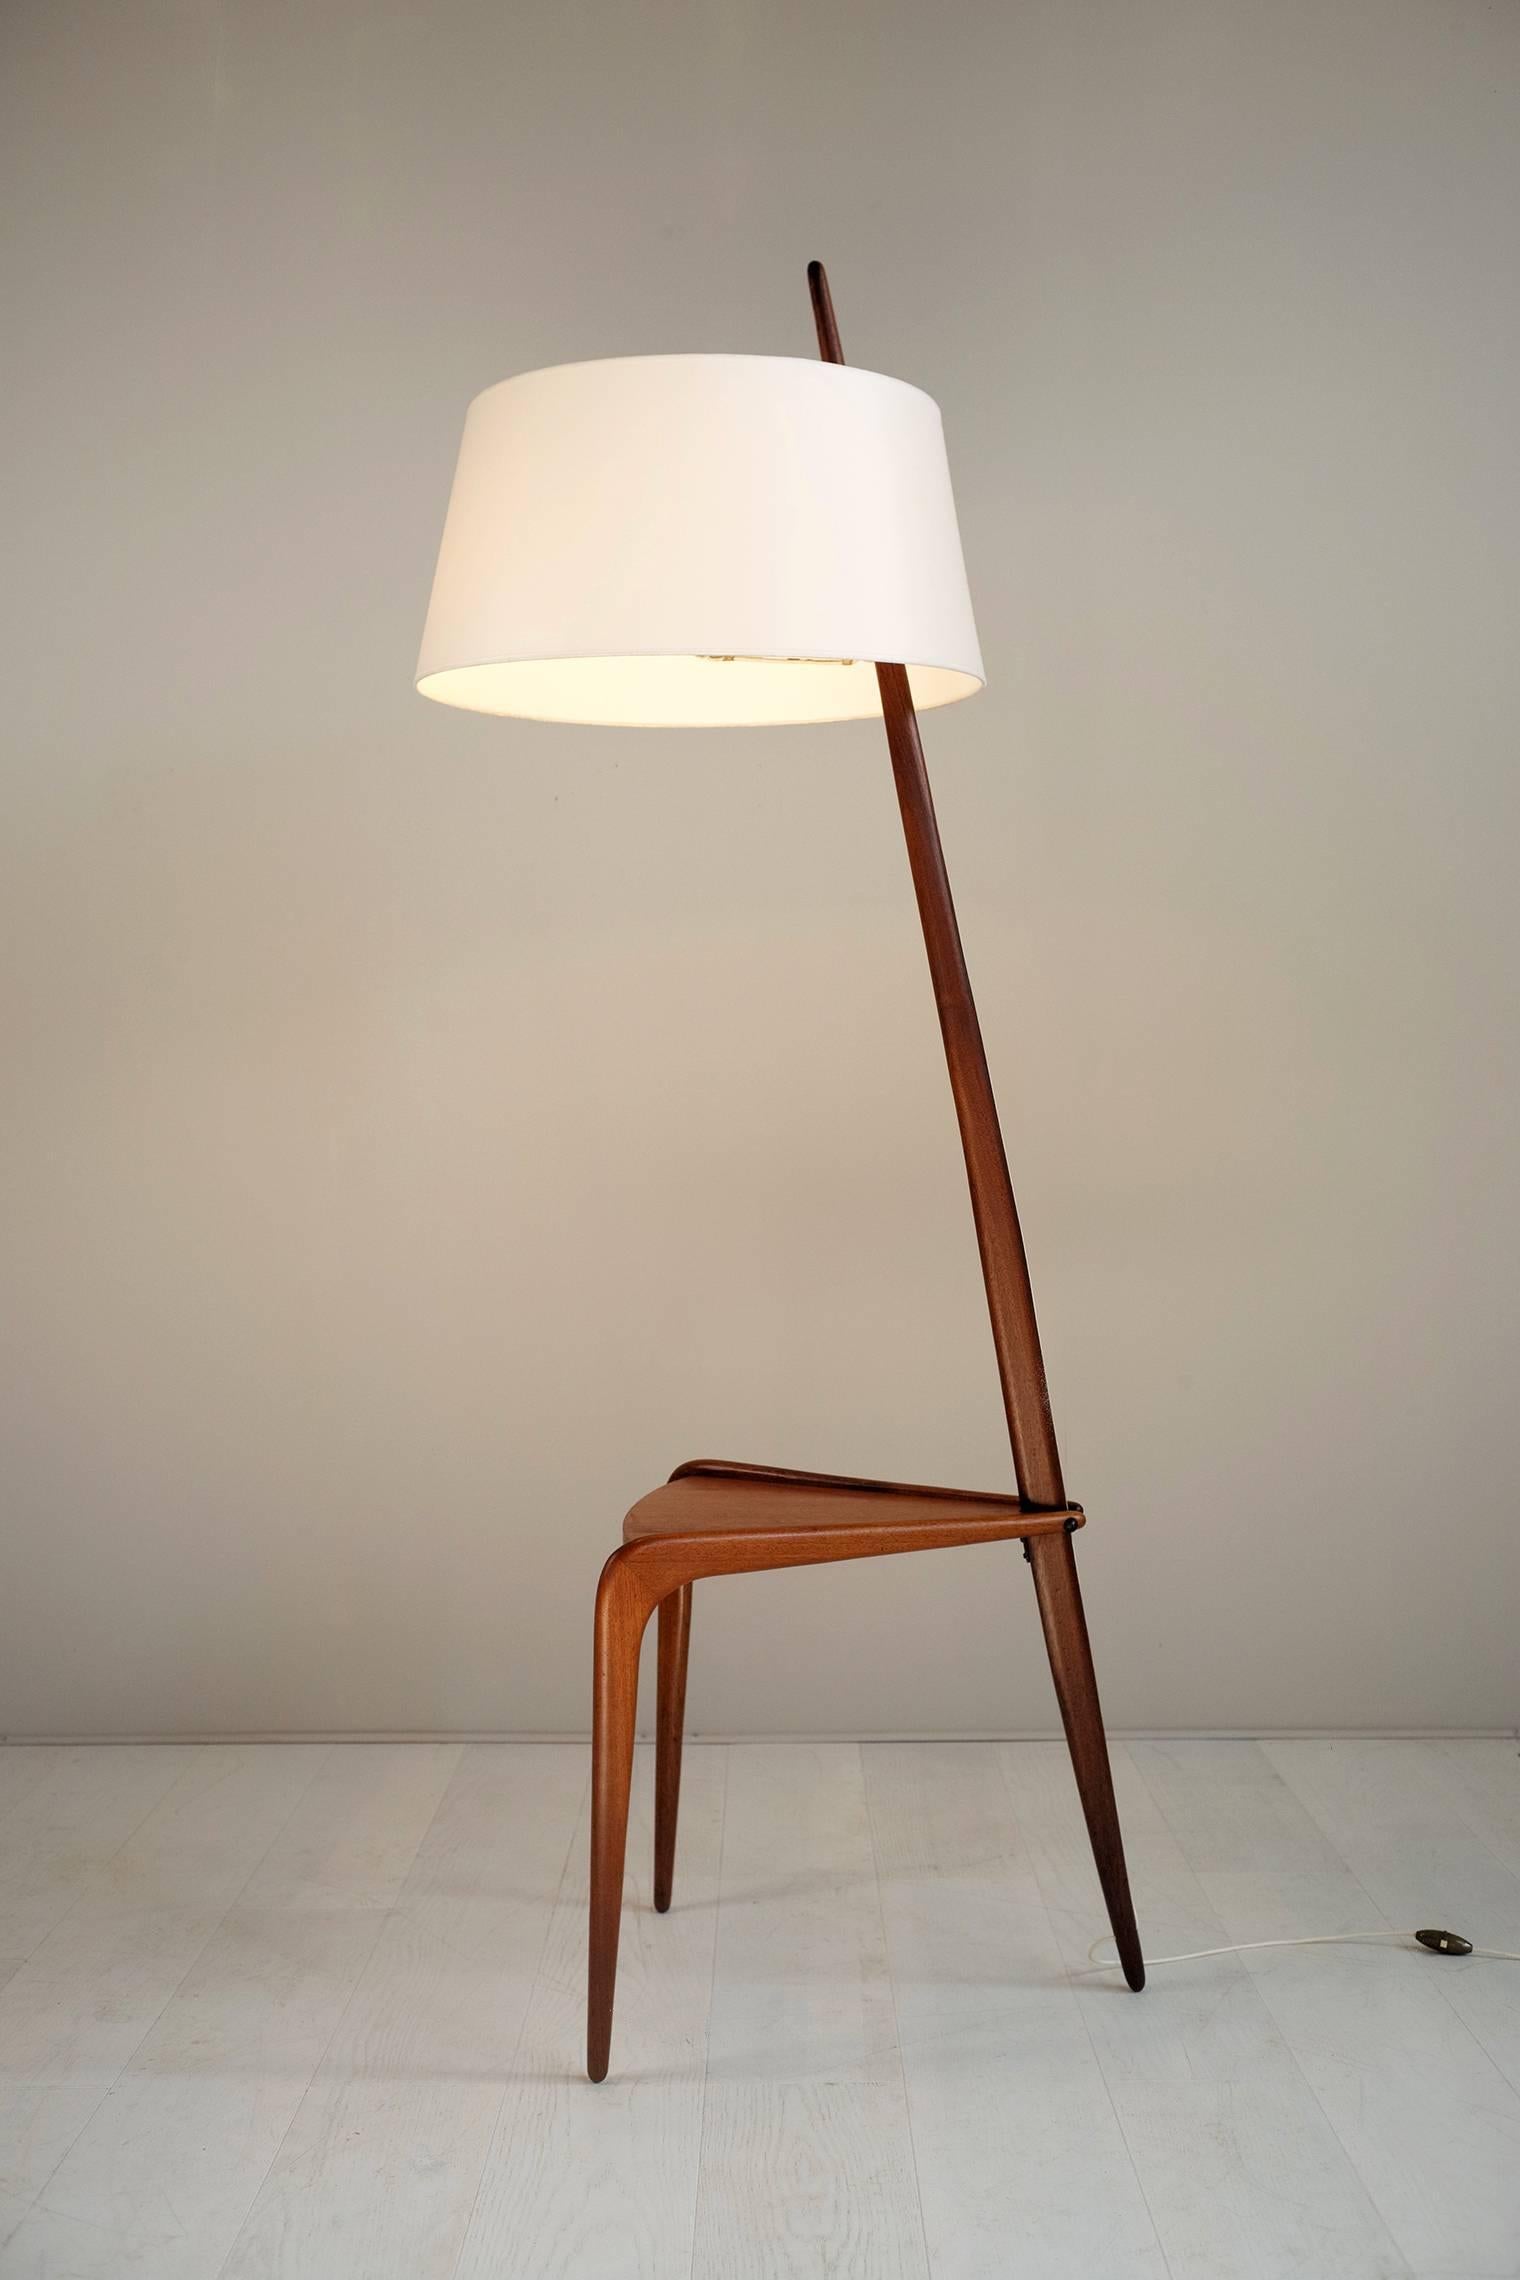 Exceptional floor lamp tablet Jean Rispal, France, 1950. Teak, metal and fabric.
Double ignition, lampshade redone to the identical.
Very beautiful state.